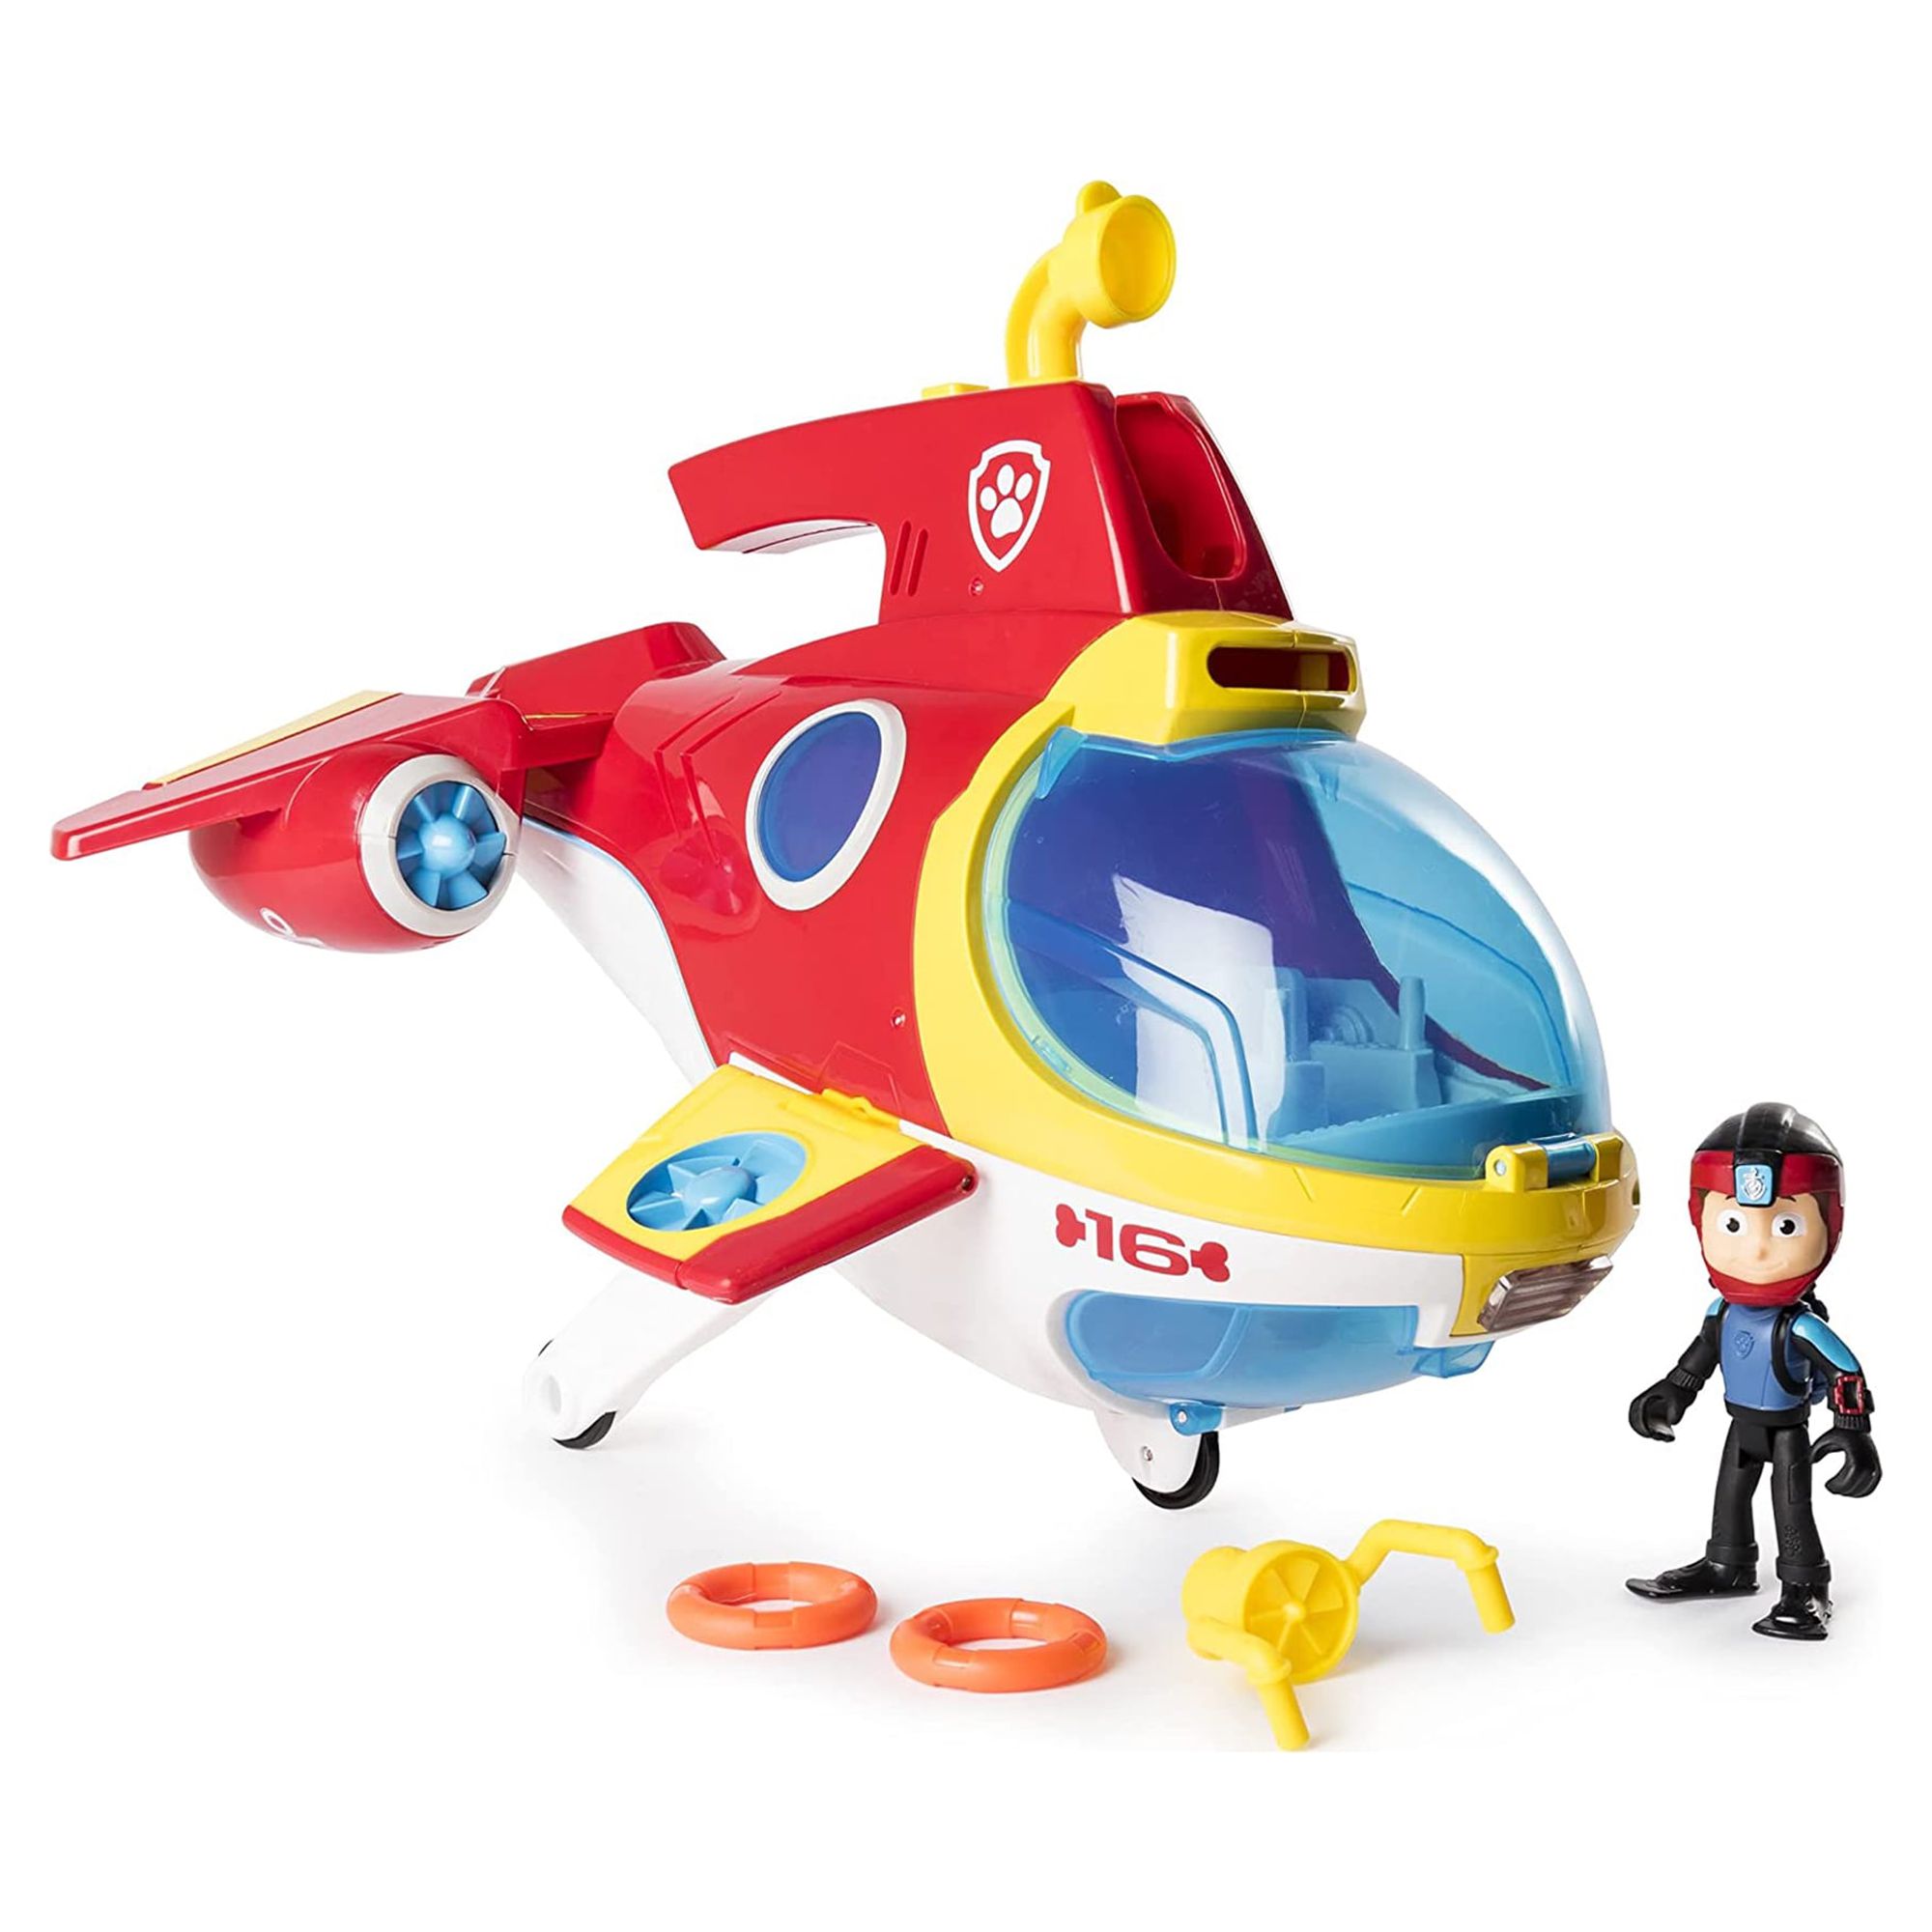 Paw Patrol Sub Patroller Air to Sea Vehicle with Lights, Sounds & Launcher - image 1 of 8